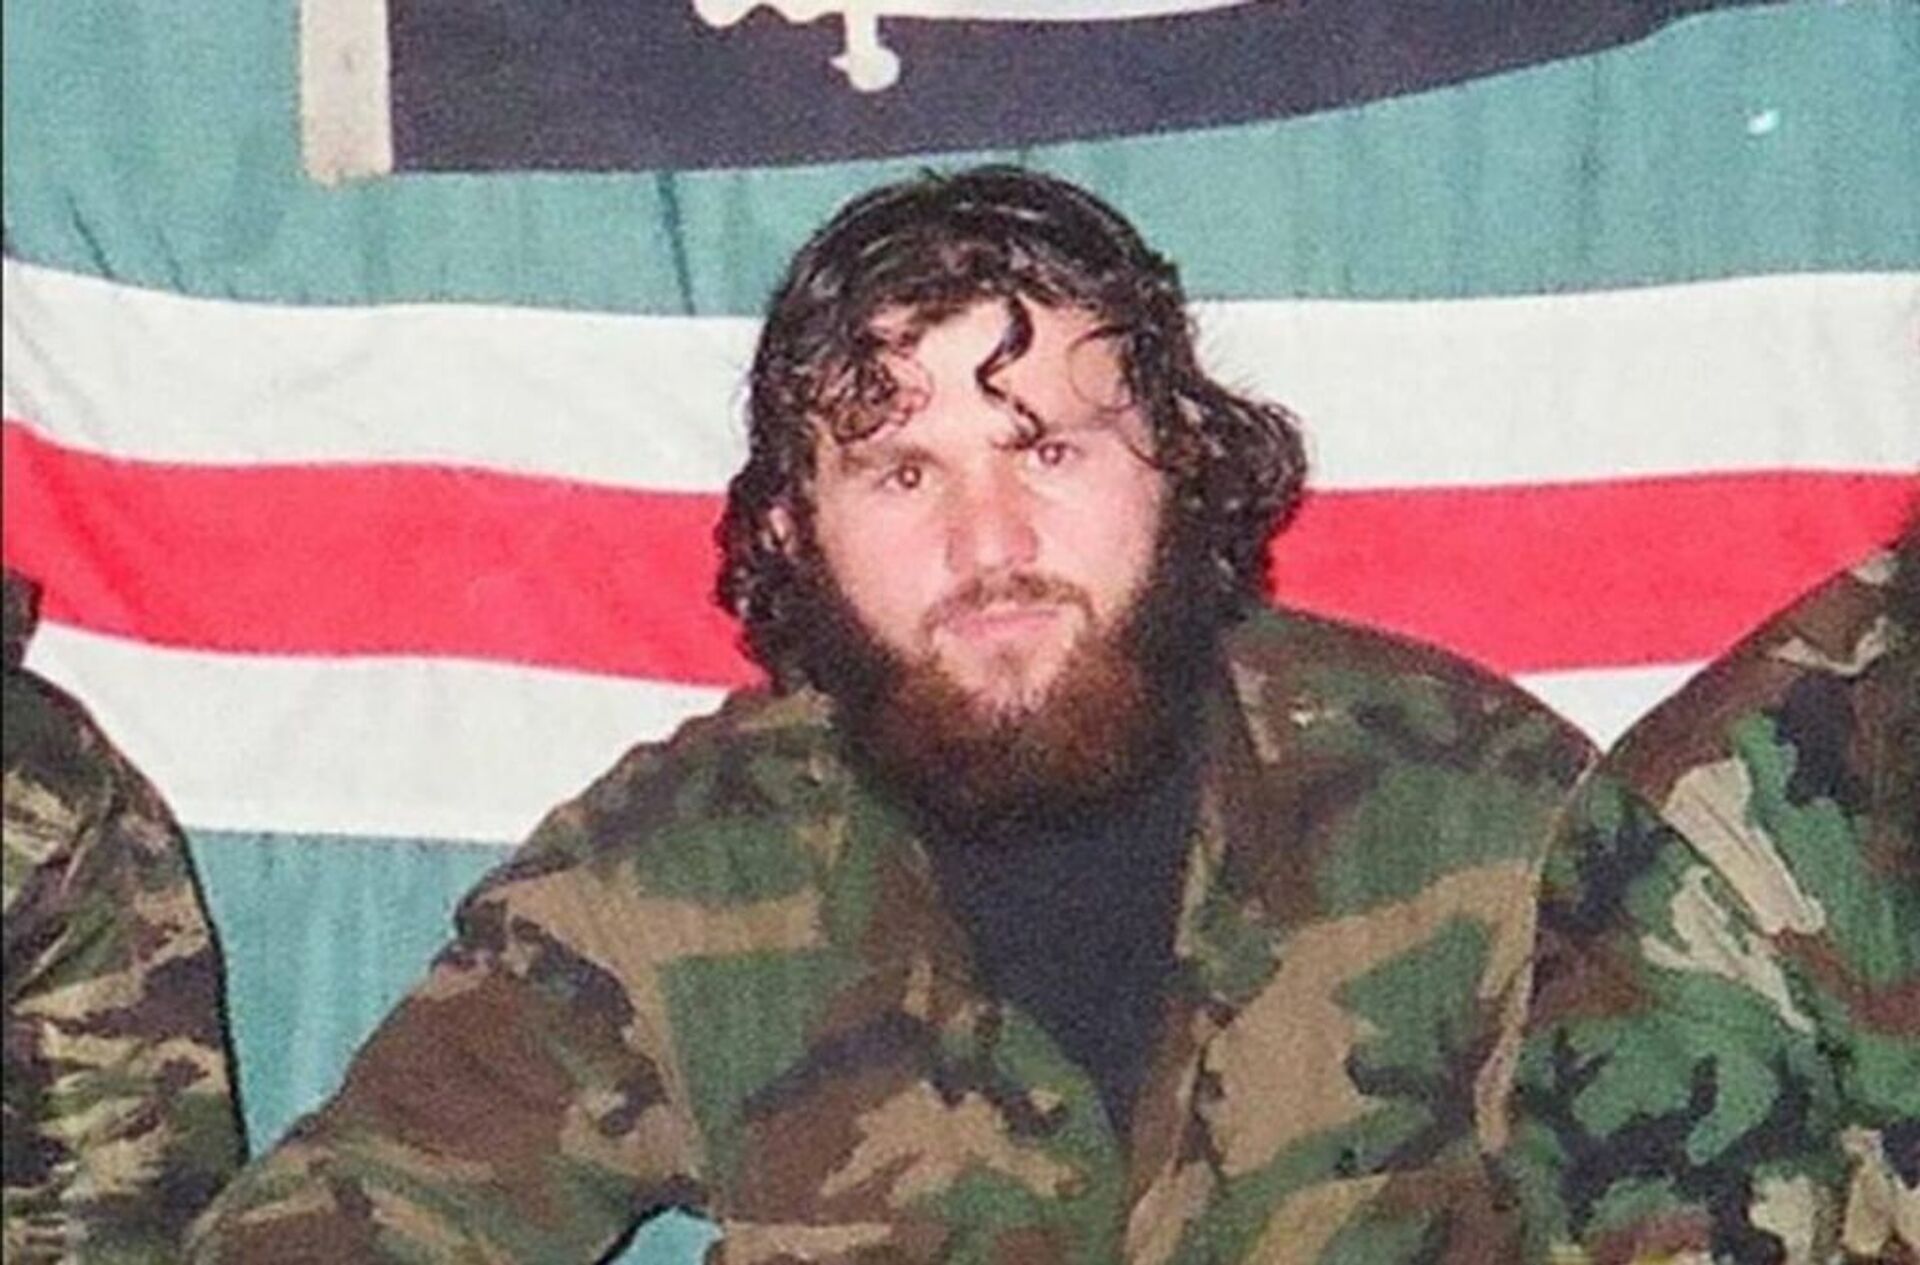 Zelimkhan Khangoshvili is pictured against the backdrop of the flag of the unrecognised Chechen Republic of Ichkeria during the Chechen conflict. - Sputnik International, 1920, 15.12.2021